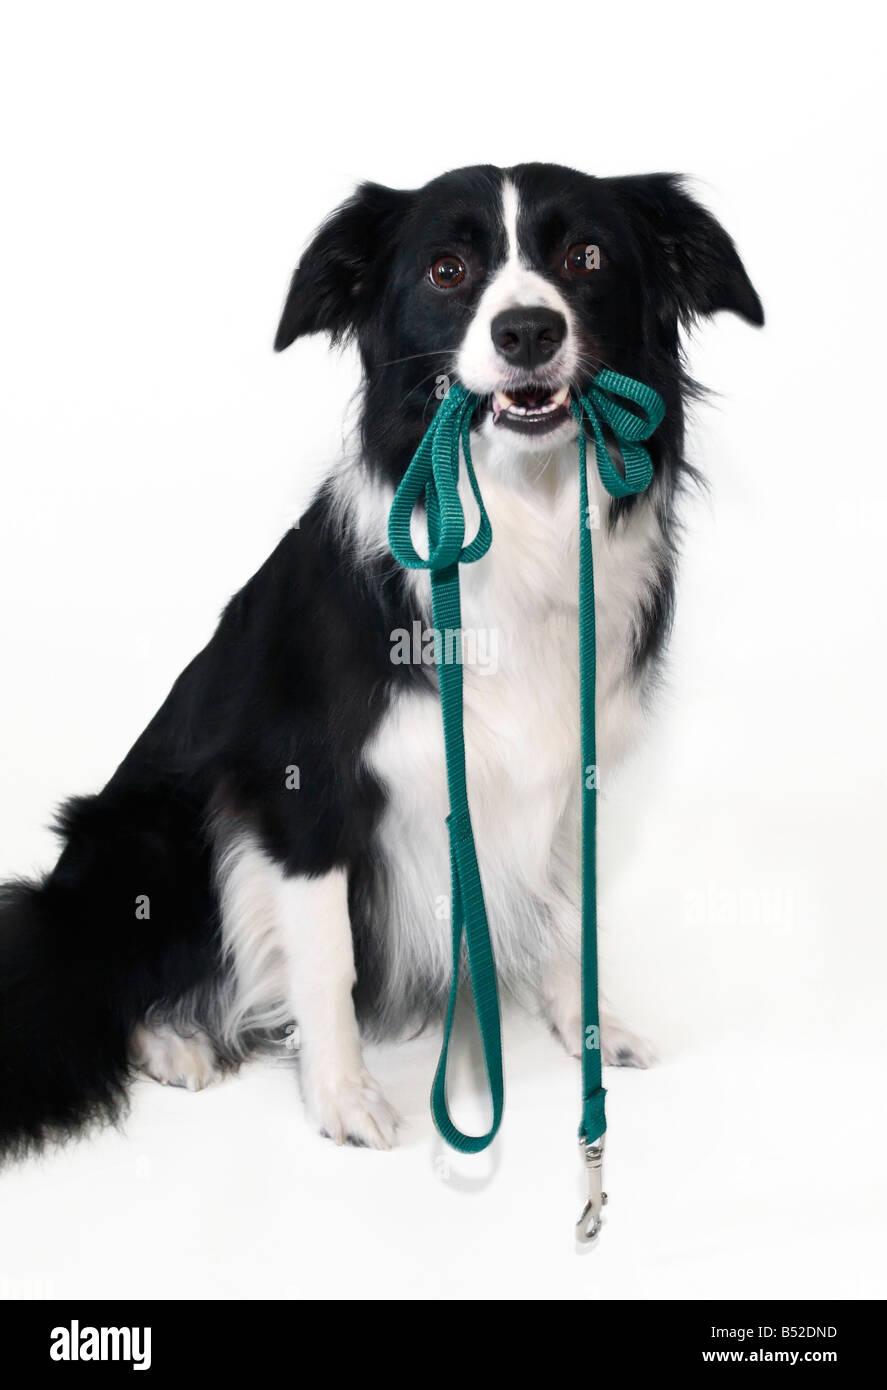 Border Collie holding a leash in its mouth Stock Photo